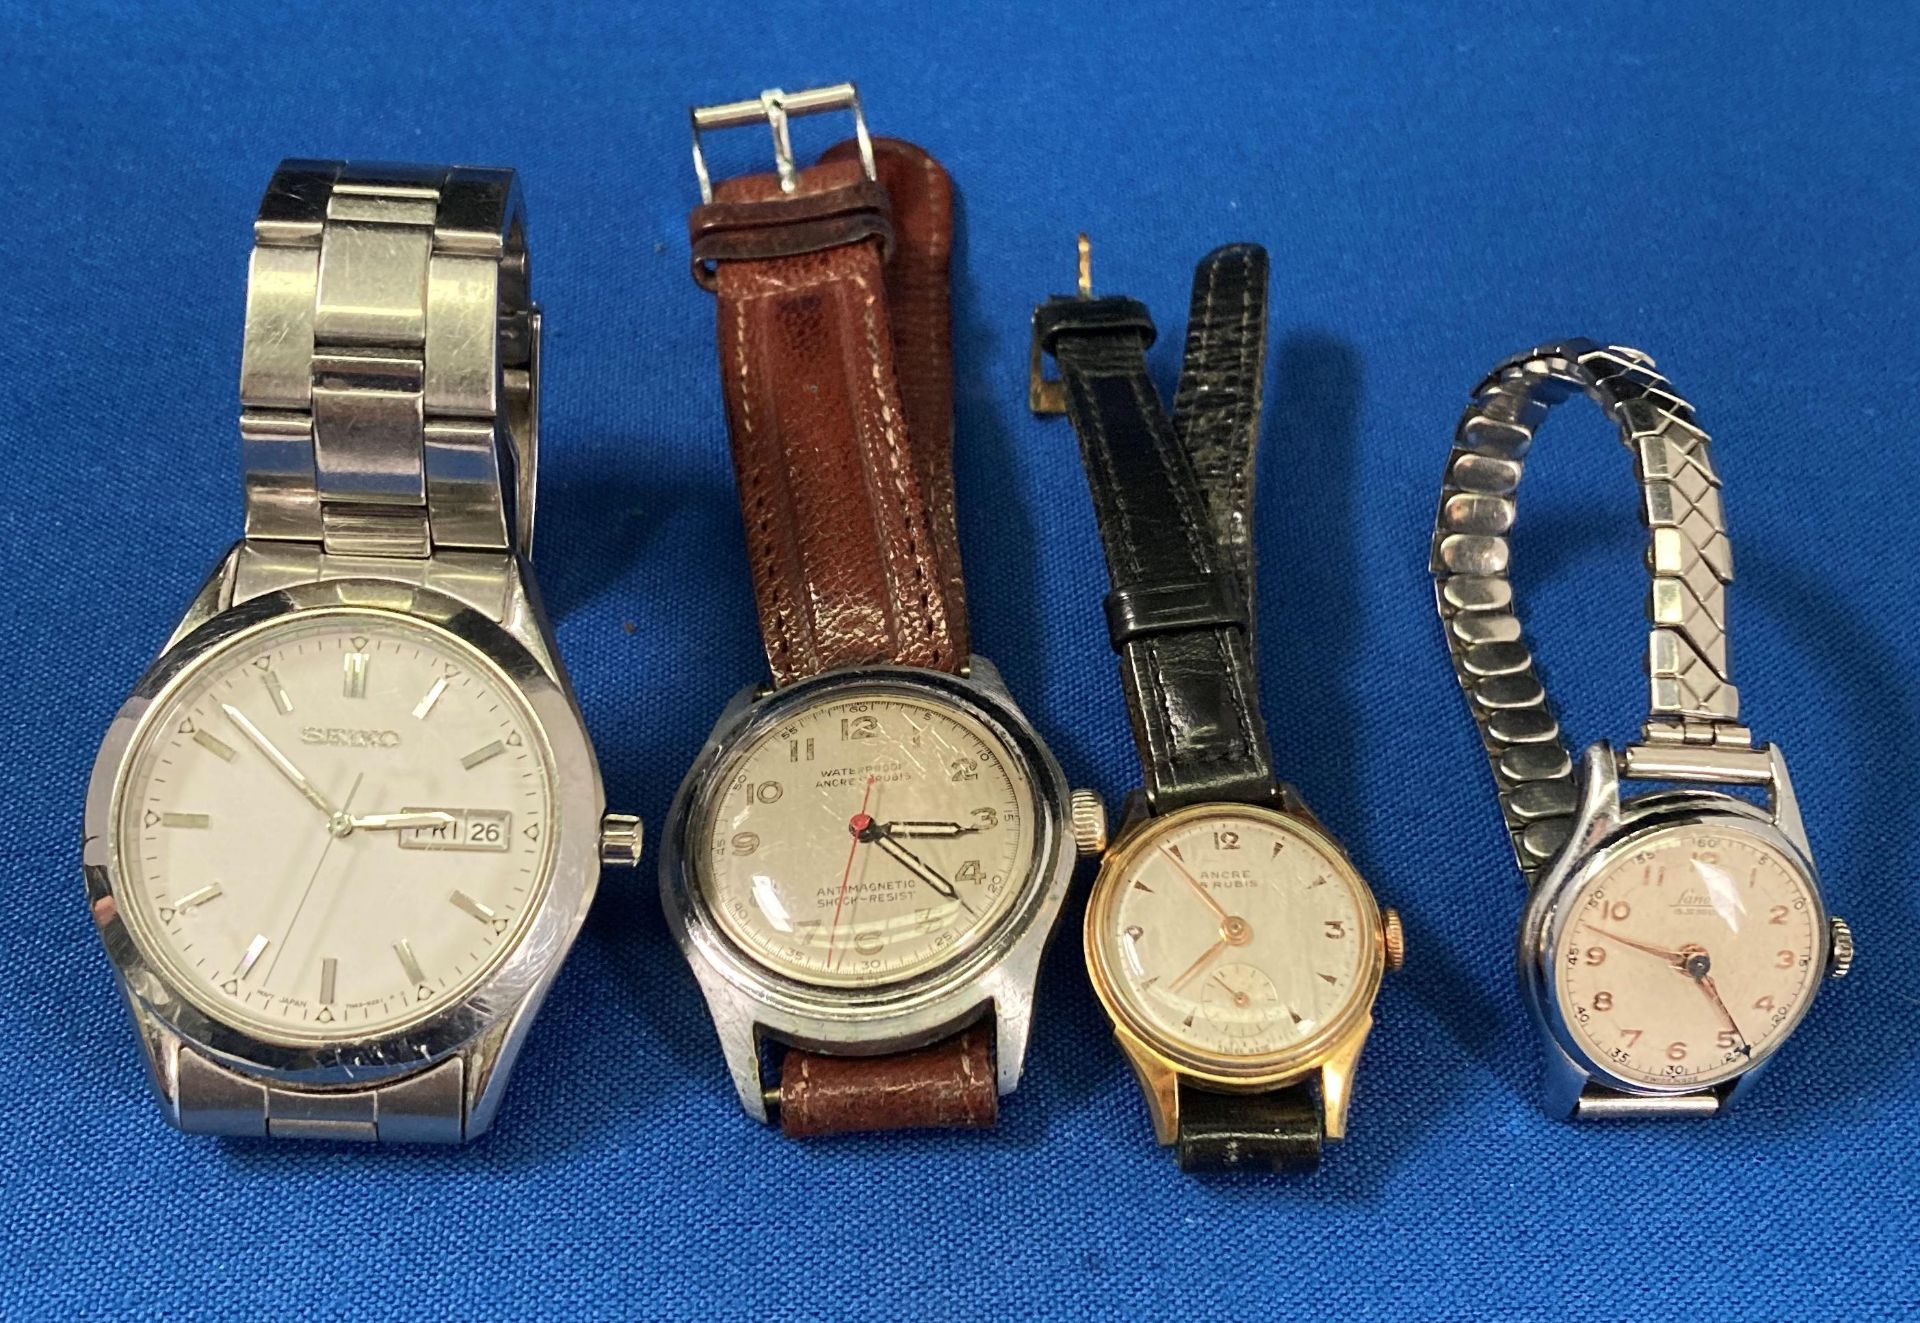 Four watches including an Ancre 15 Rubis gold/gold-plated watch (not tested - no visible hallmark)